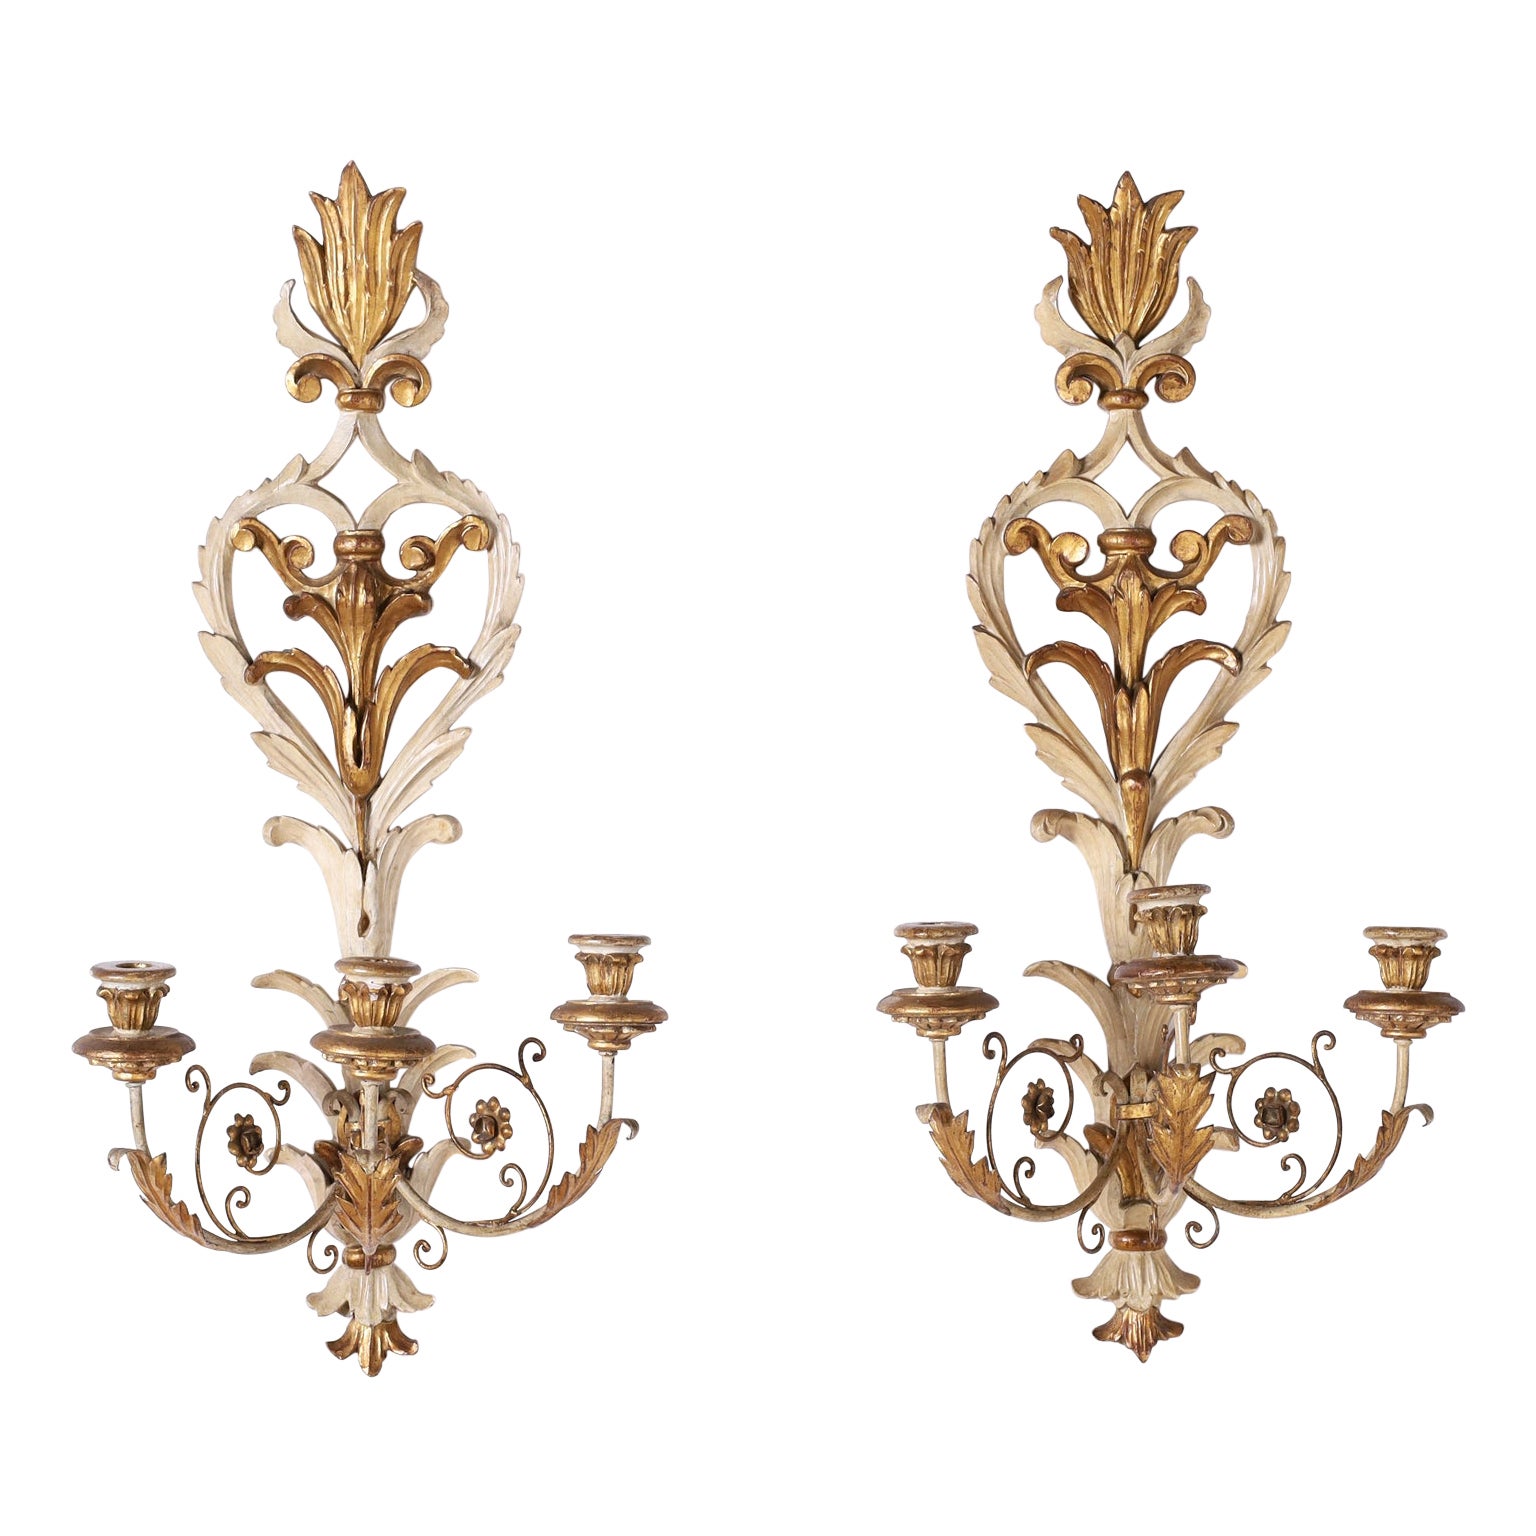 Pair of Antique Carved Wood Gilt and Painted Rococo Style Wall Sconces